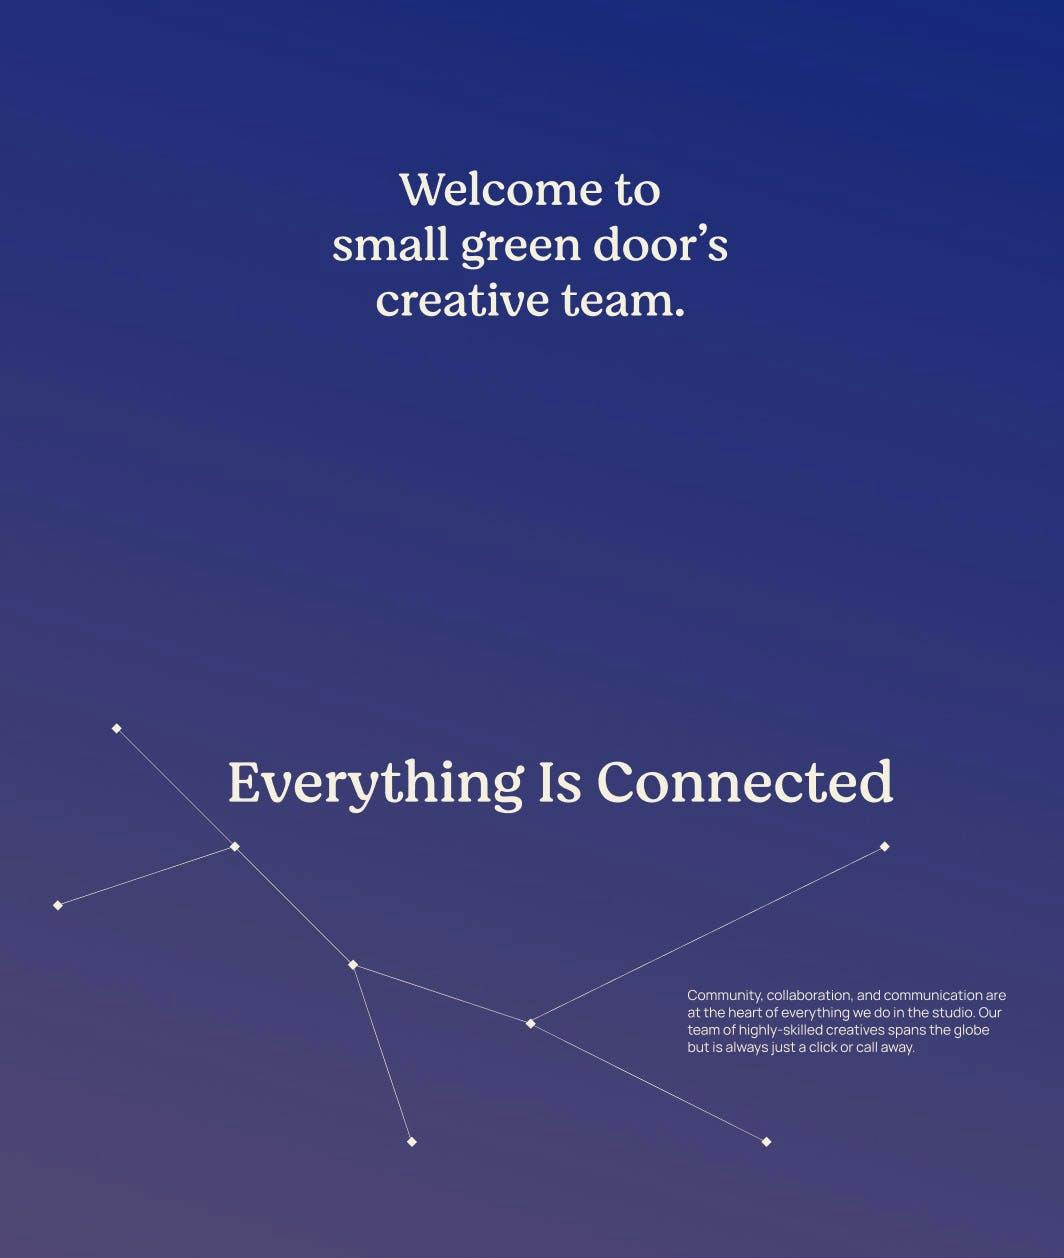 Small Green Door landing page featuring a blue/purple background with text that reads 'Everything is connected' in bold letters. Small green door text is visible at the top of the page. Below the text, there is a scrolling section. 